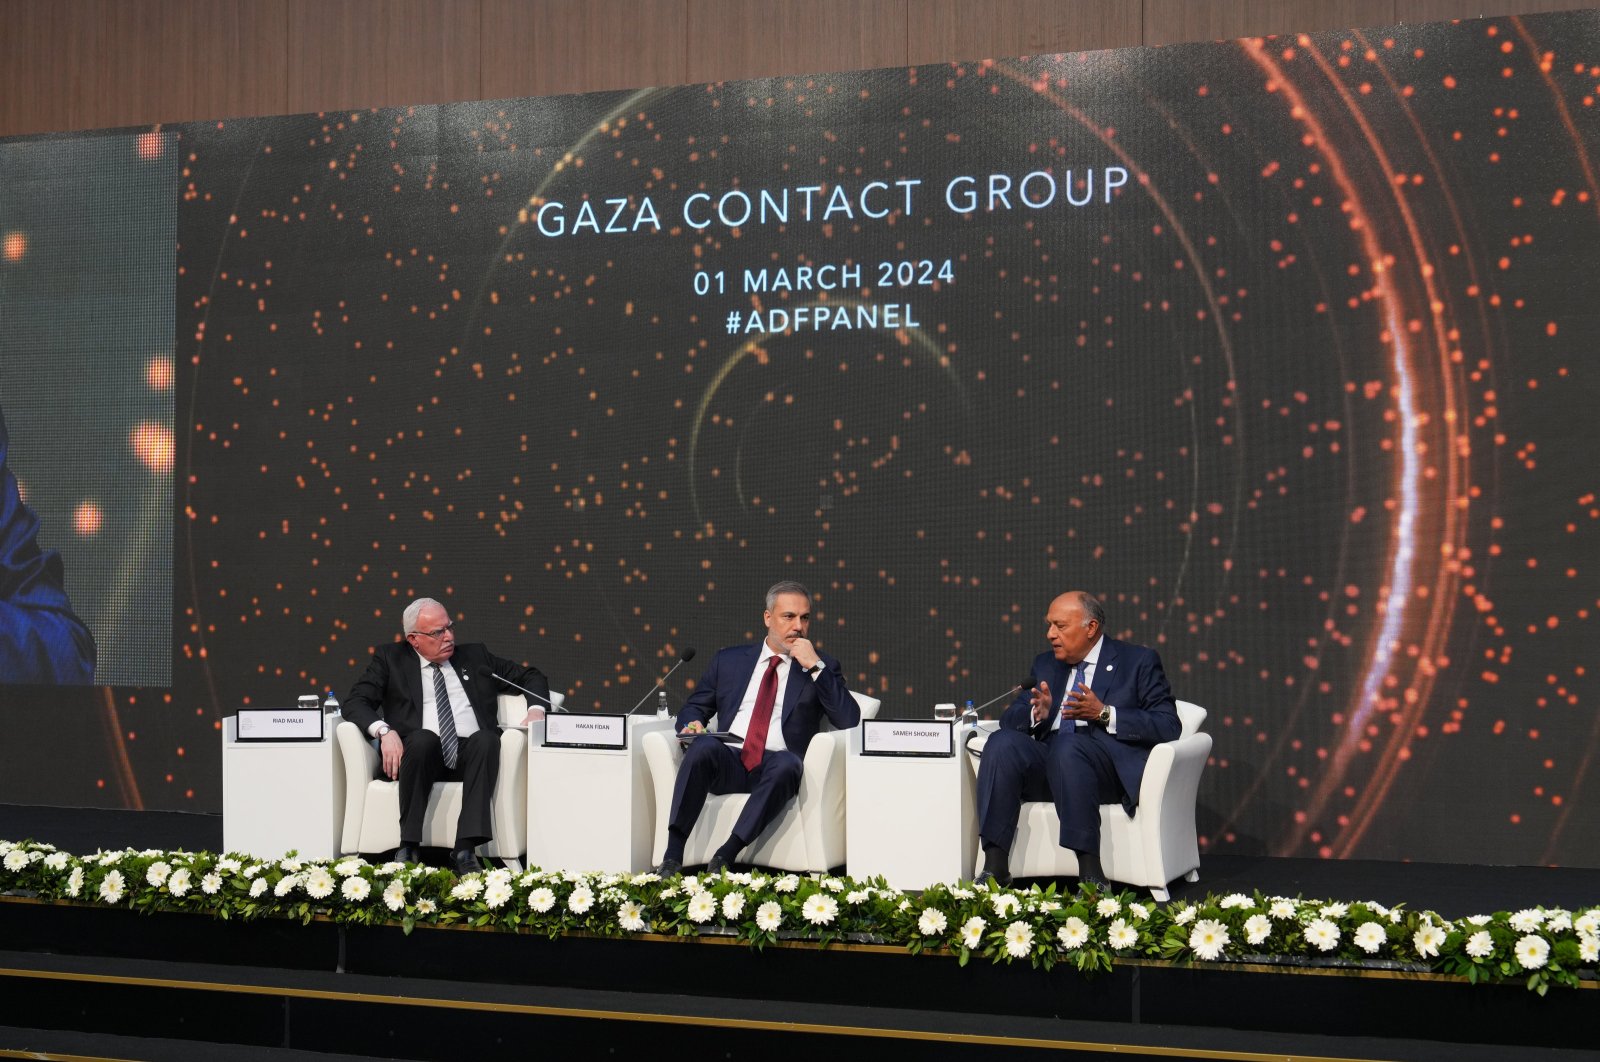 Palestinian Foreign Minister Riyad al-Malki (L), Foreign Minister Hakan Fidan (C) and Egyptian Foreign Minister Sameh Shoukry attend the &quot;Gaza Contact Group&quot; panel during the Antalya Diplomacy Forum (ADF) in Antalya, Türkiye, March 1, 2024. (EPA Photo)